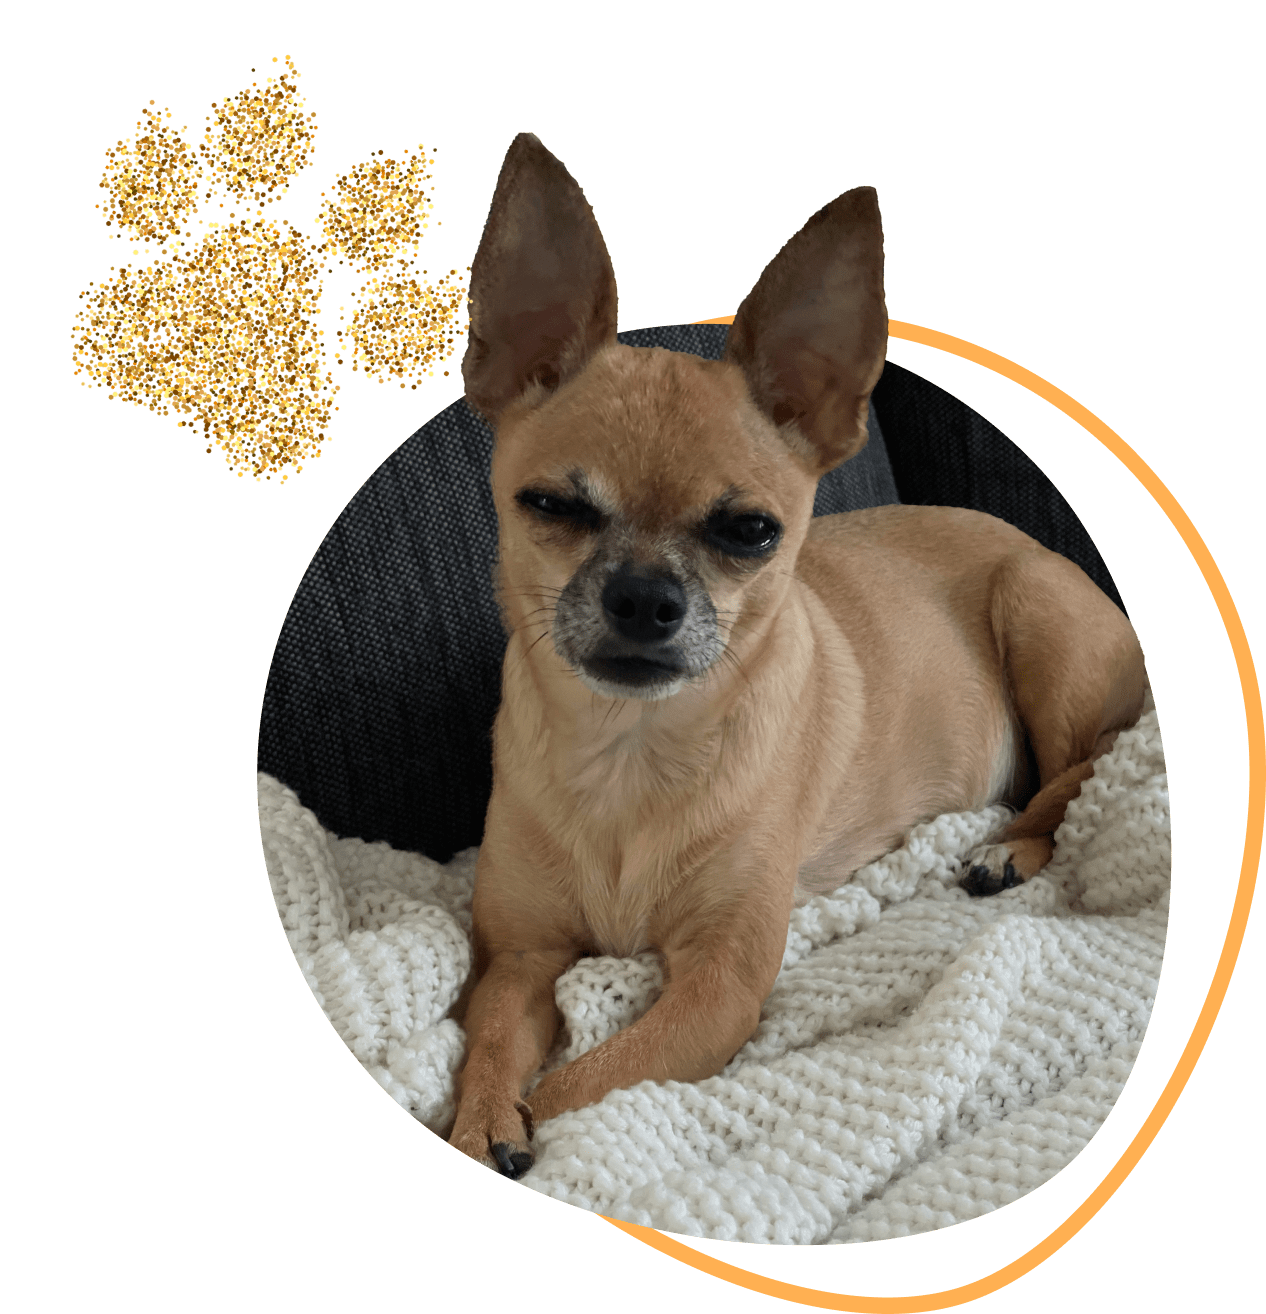 Famous Chihuahua facts